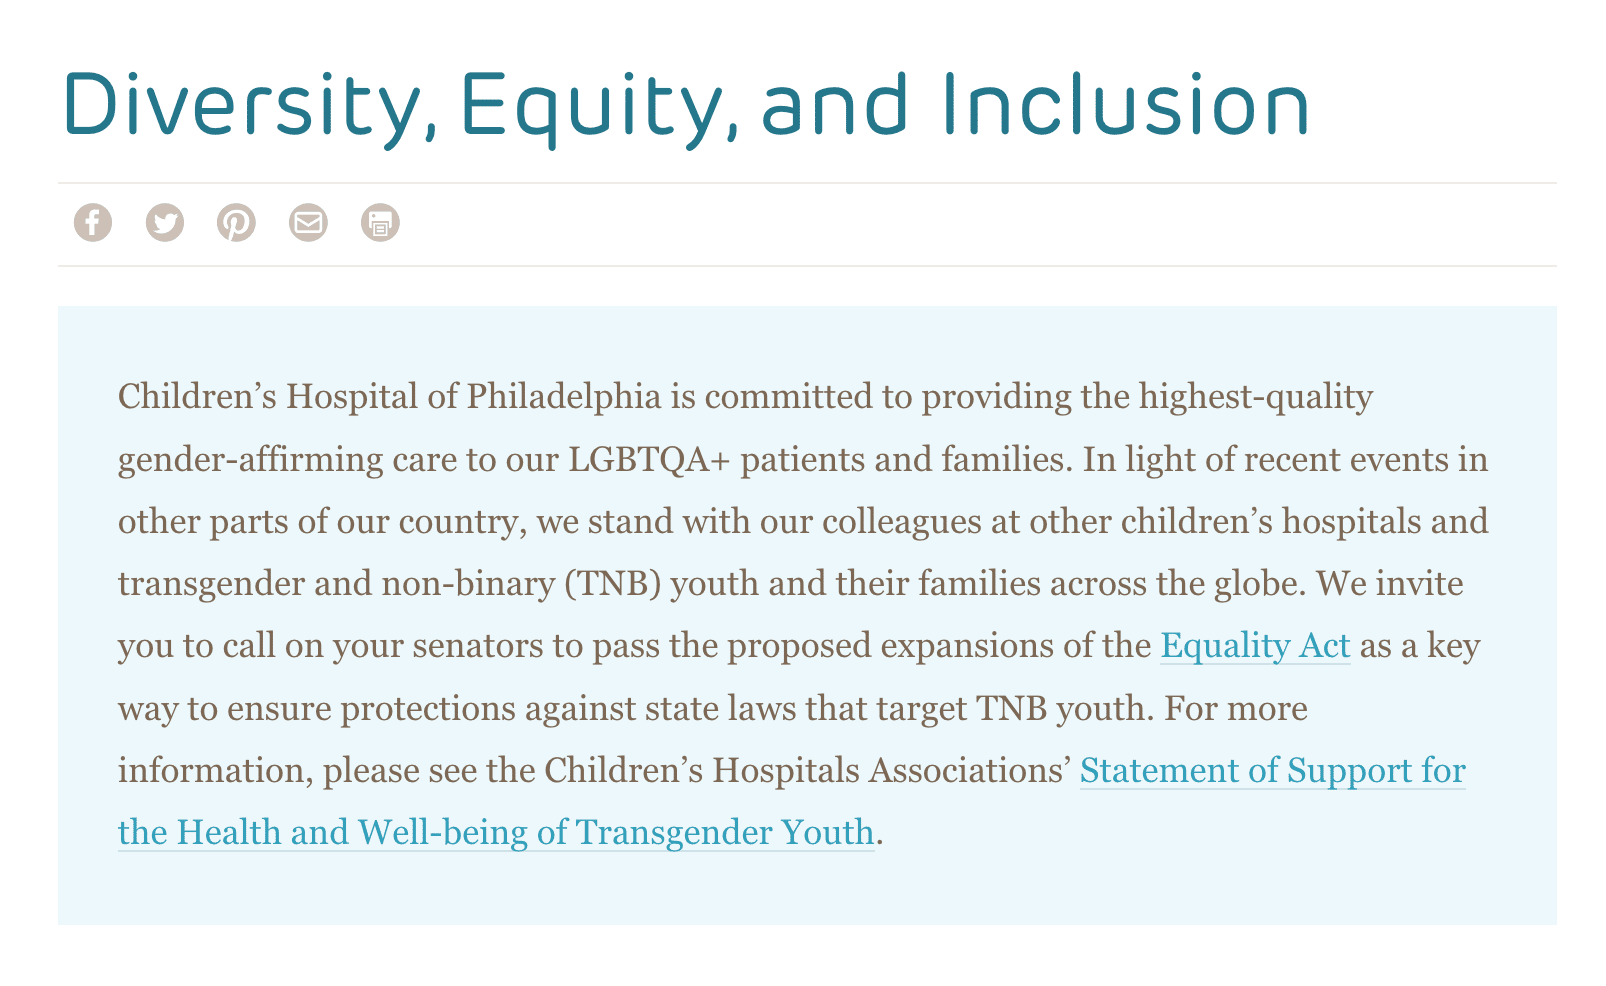 health equity diversity and inclusion